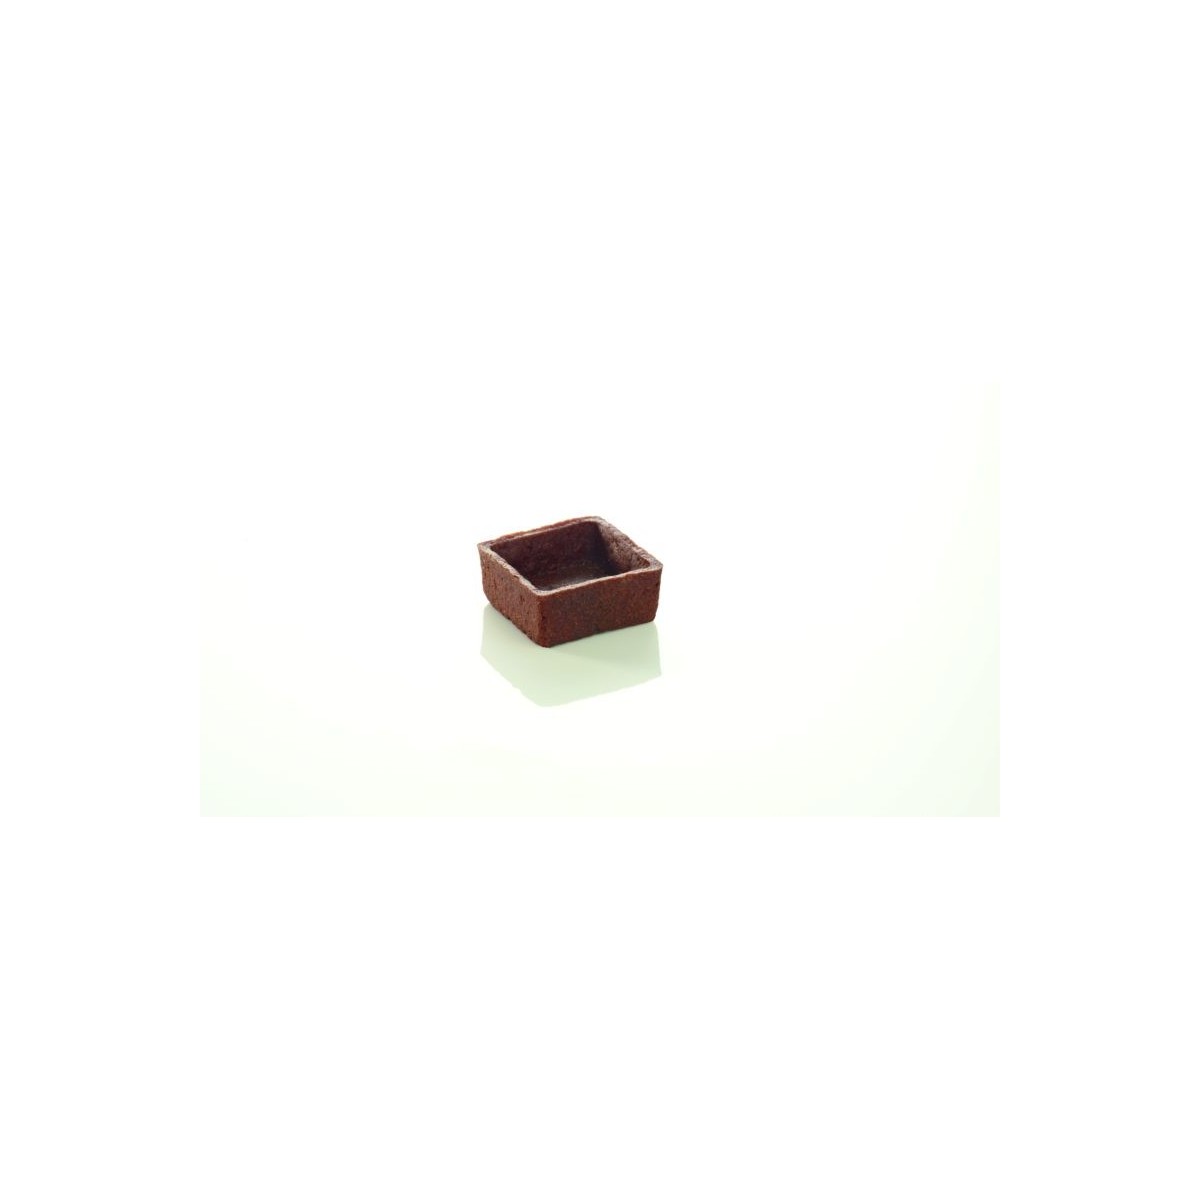 PIDY TARTLET SANDED SQUARE 7X7CM H1.8CM CHOCOLATE TRENDY SHELL 96 PIECES  BOX